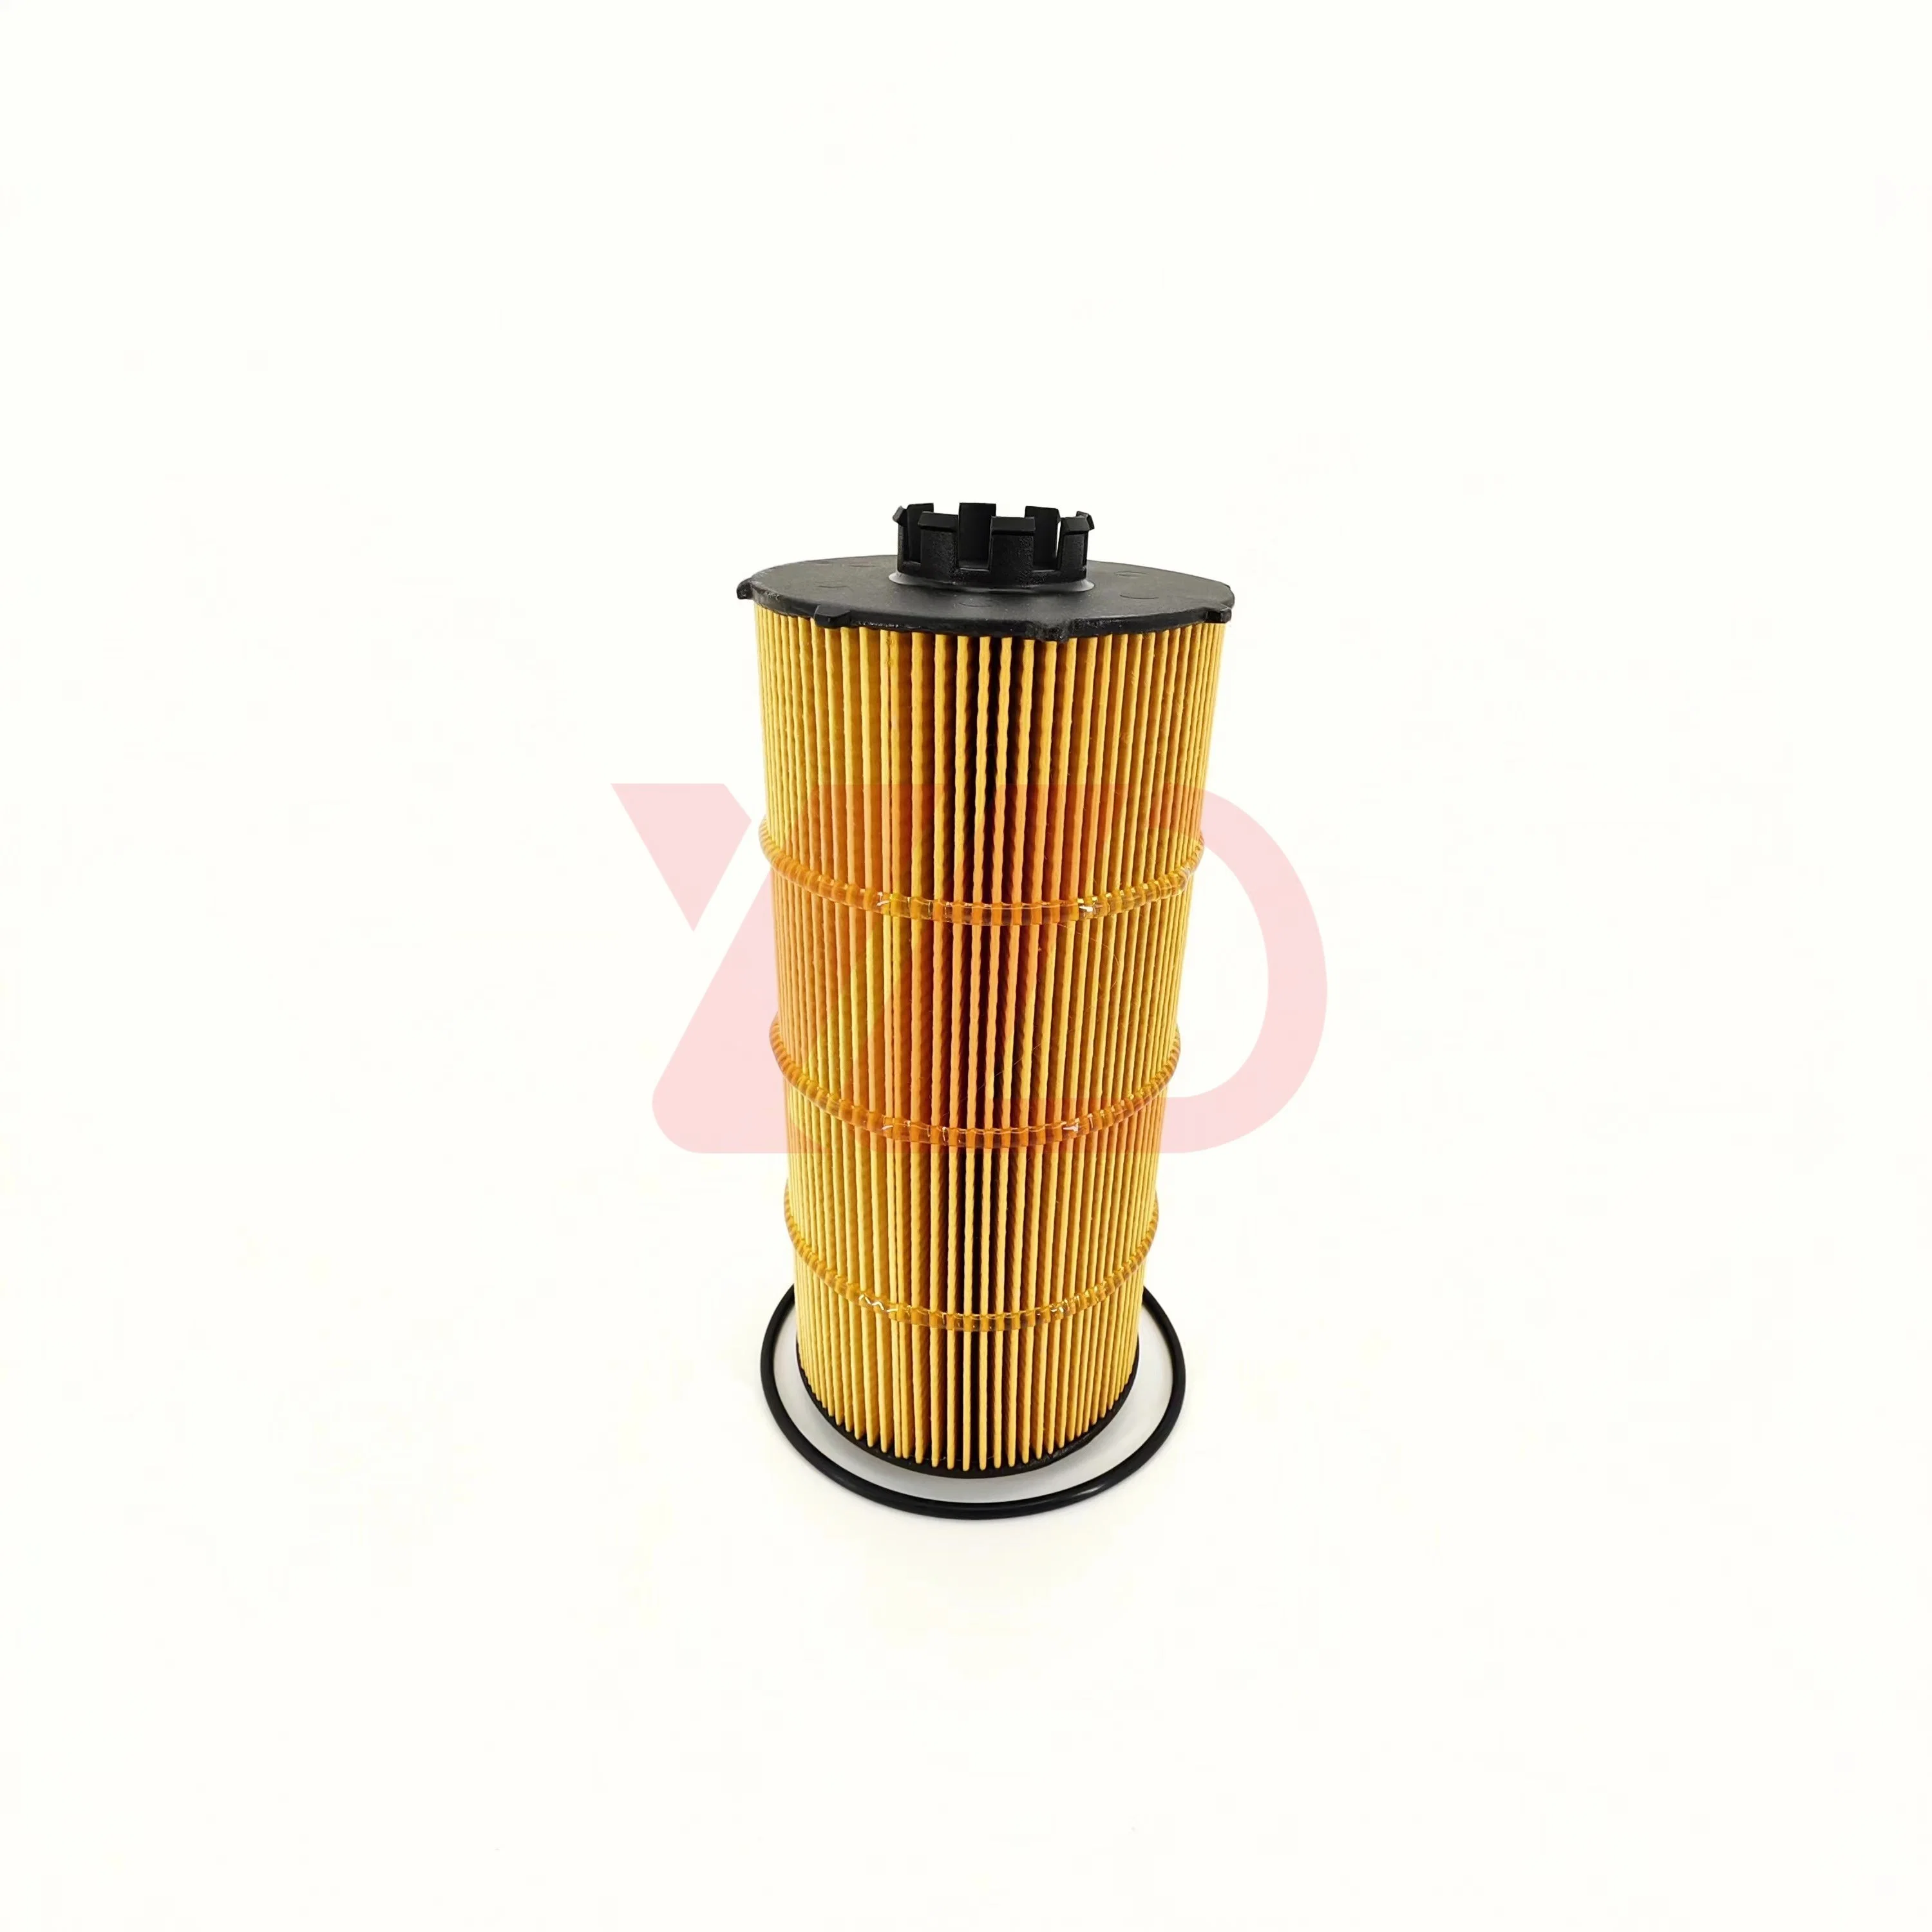 Diesel Engine Part Oil Filter Core 1002070370 for Weichai Wp13h Wp10h